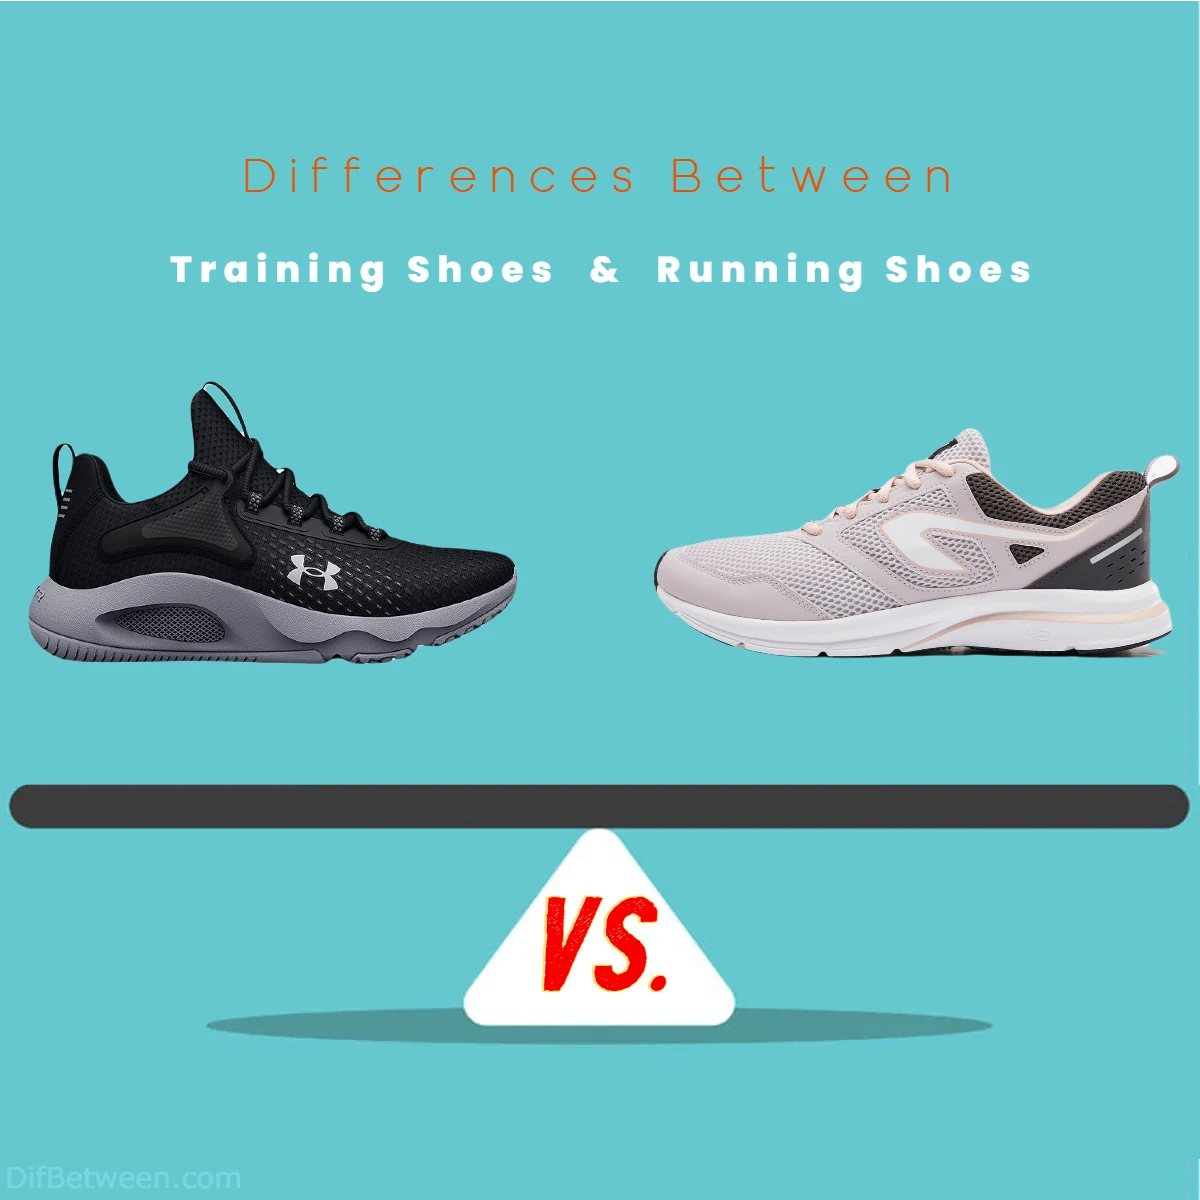 Differences Between Training vs Running Shoes